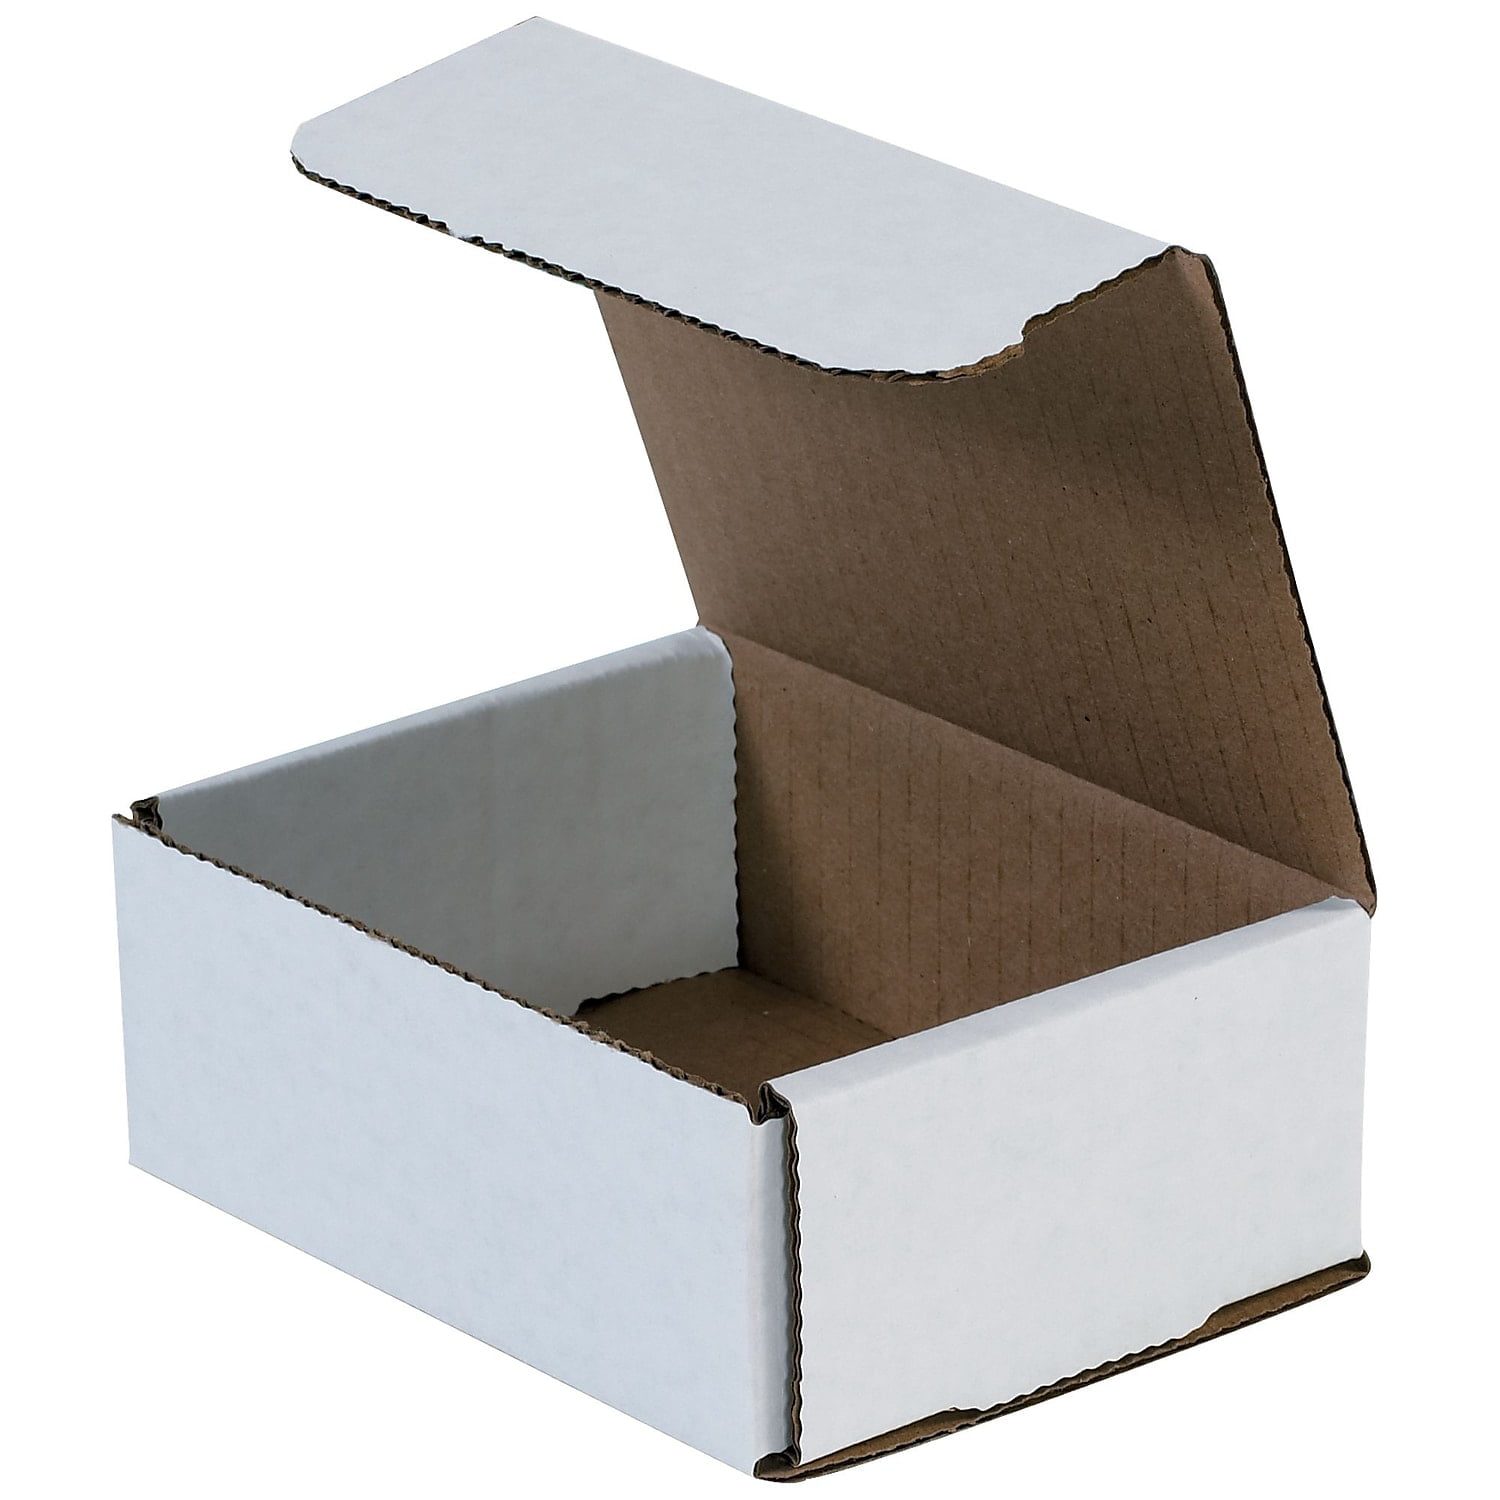 -  31 Sizes Available Medium 9" 25 Pack Corrugated Cardboard Shipping Boxes 